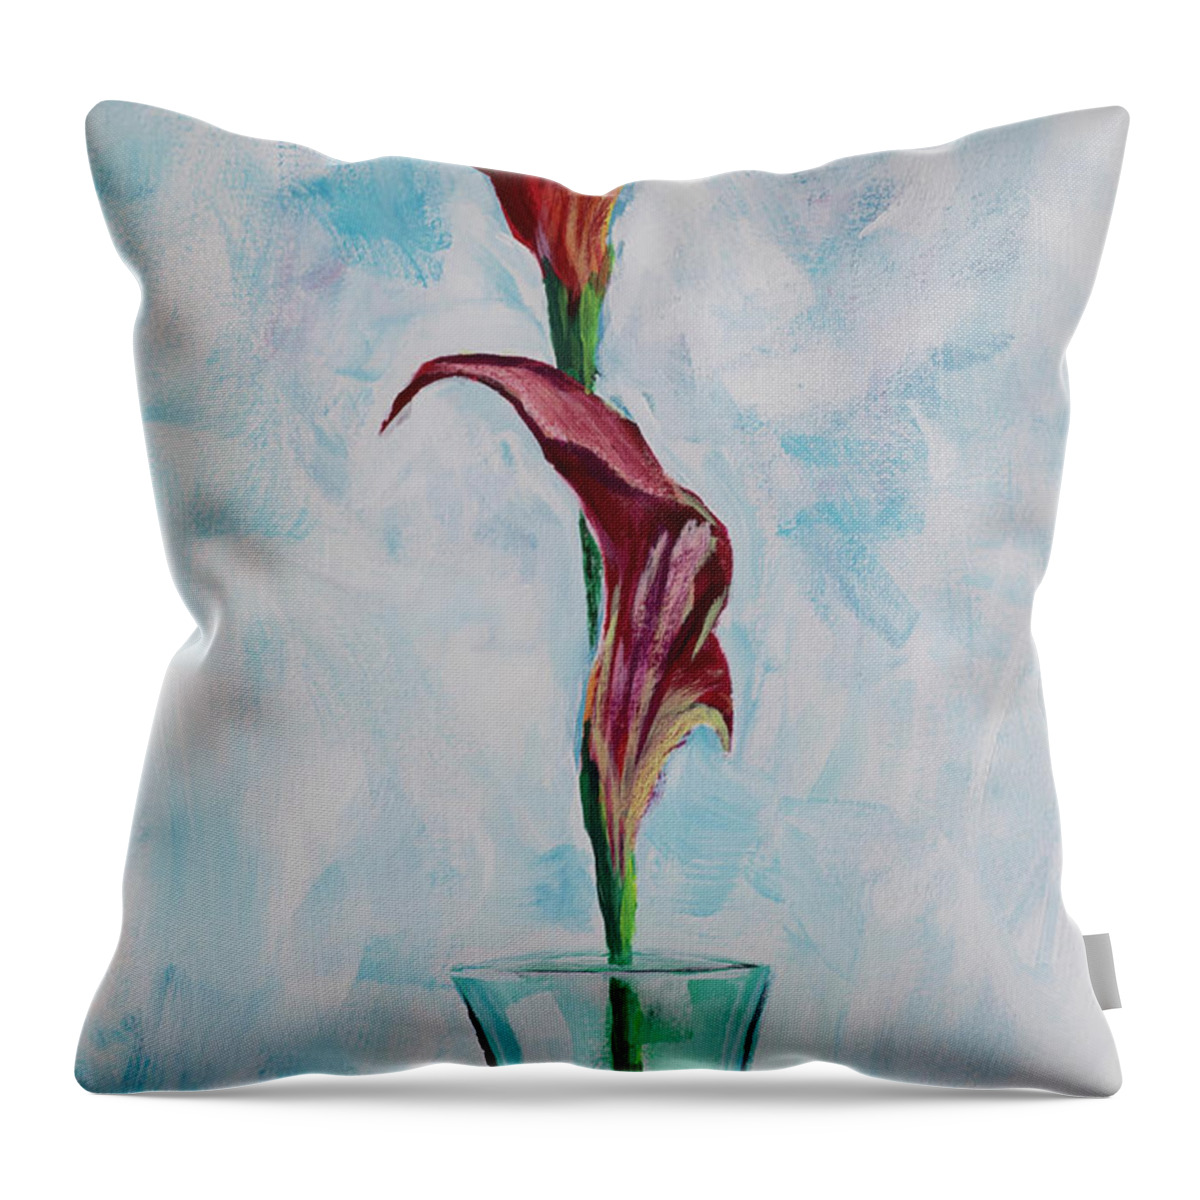 Calla Throw Pillow featuring the painting Calla Lilies by Mark Ross